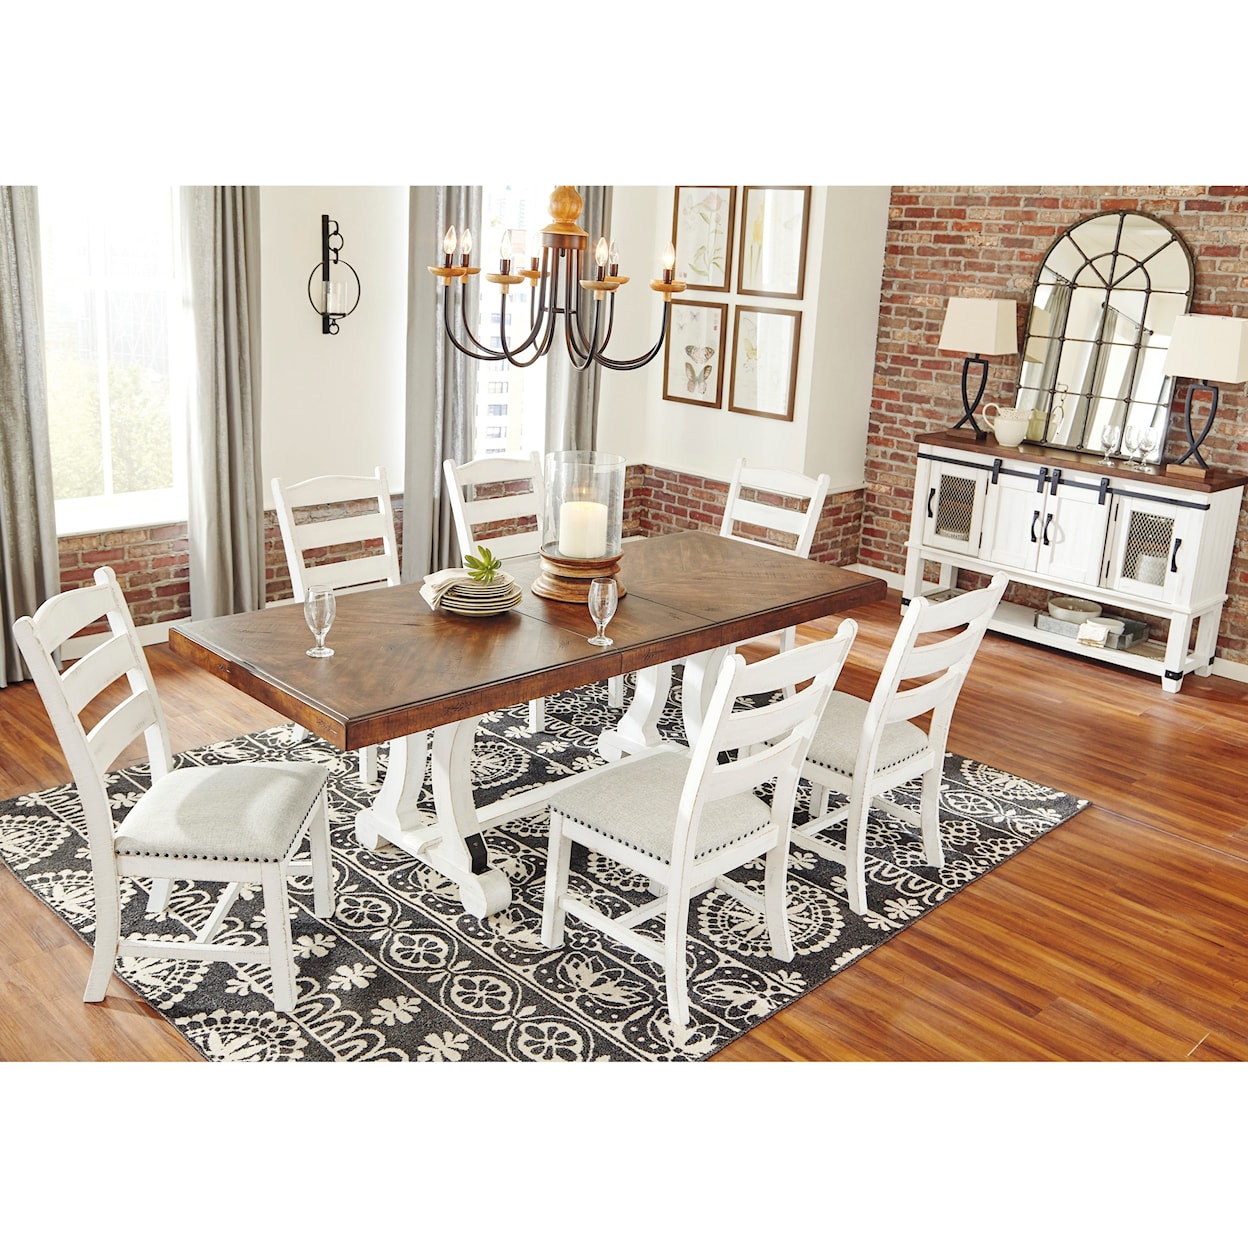 Signature Design by Ashley Valebeck Formal Dining Room Group